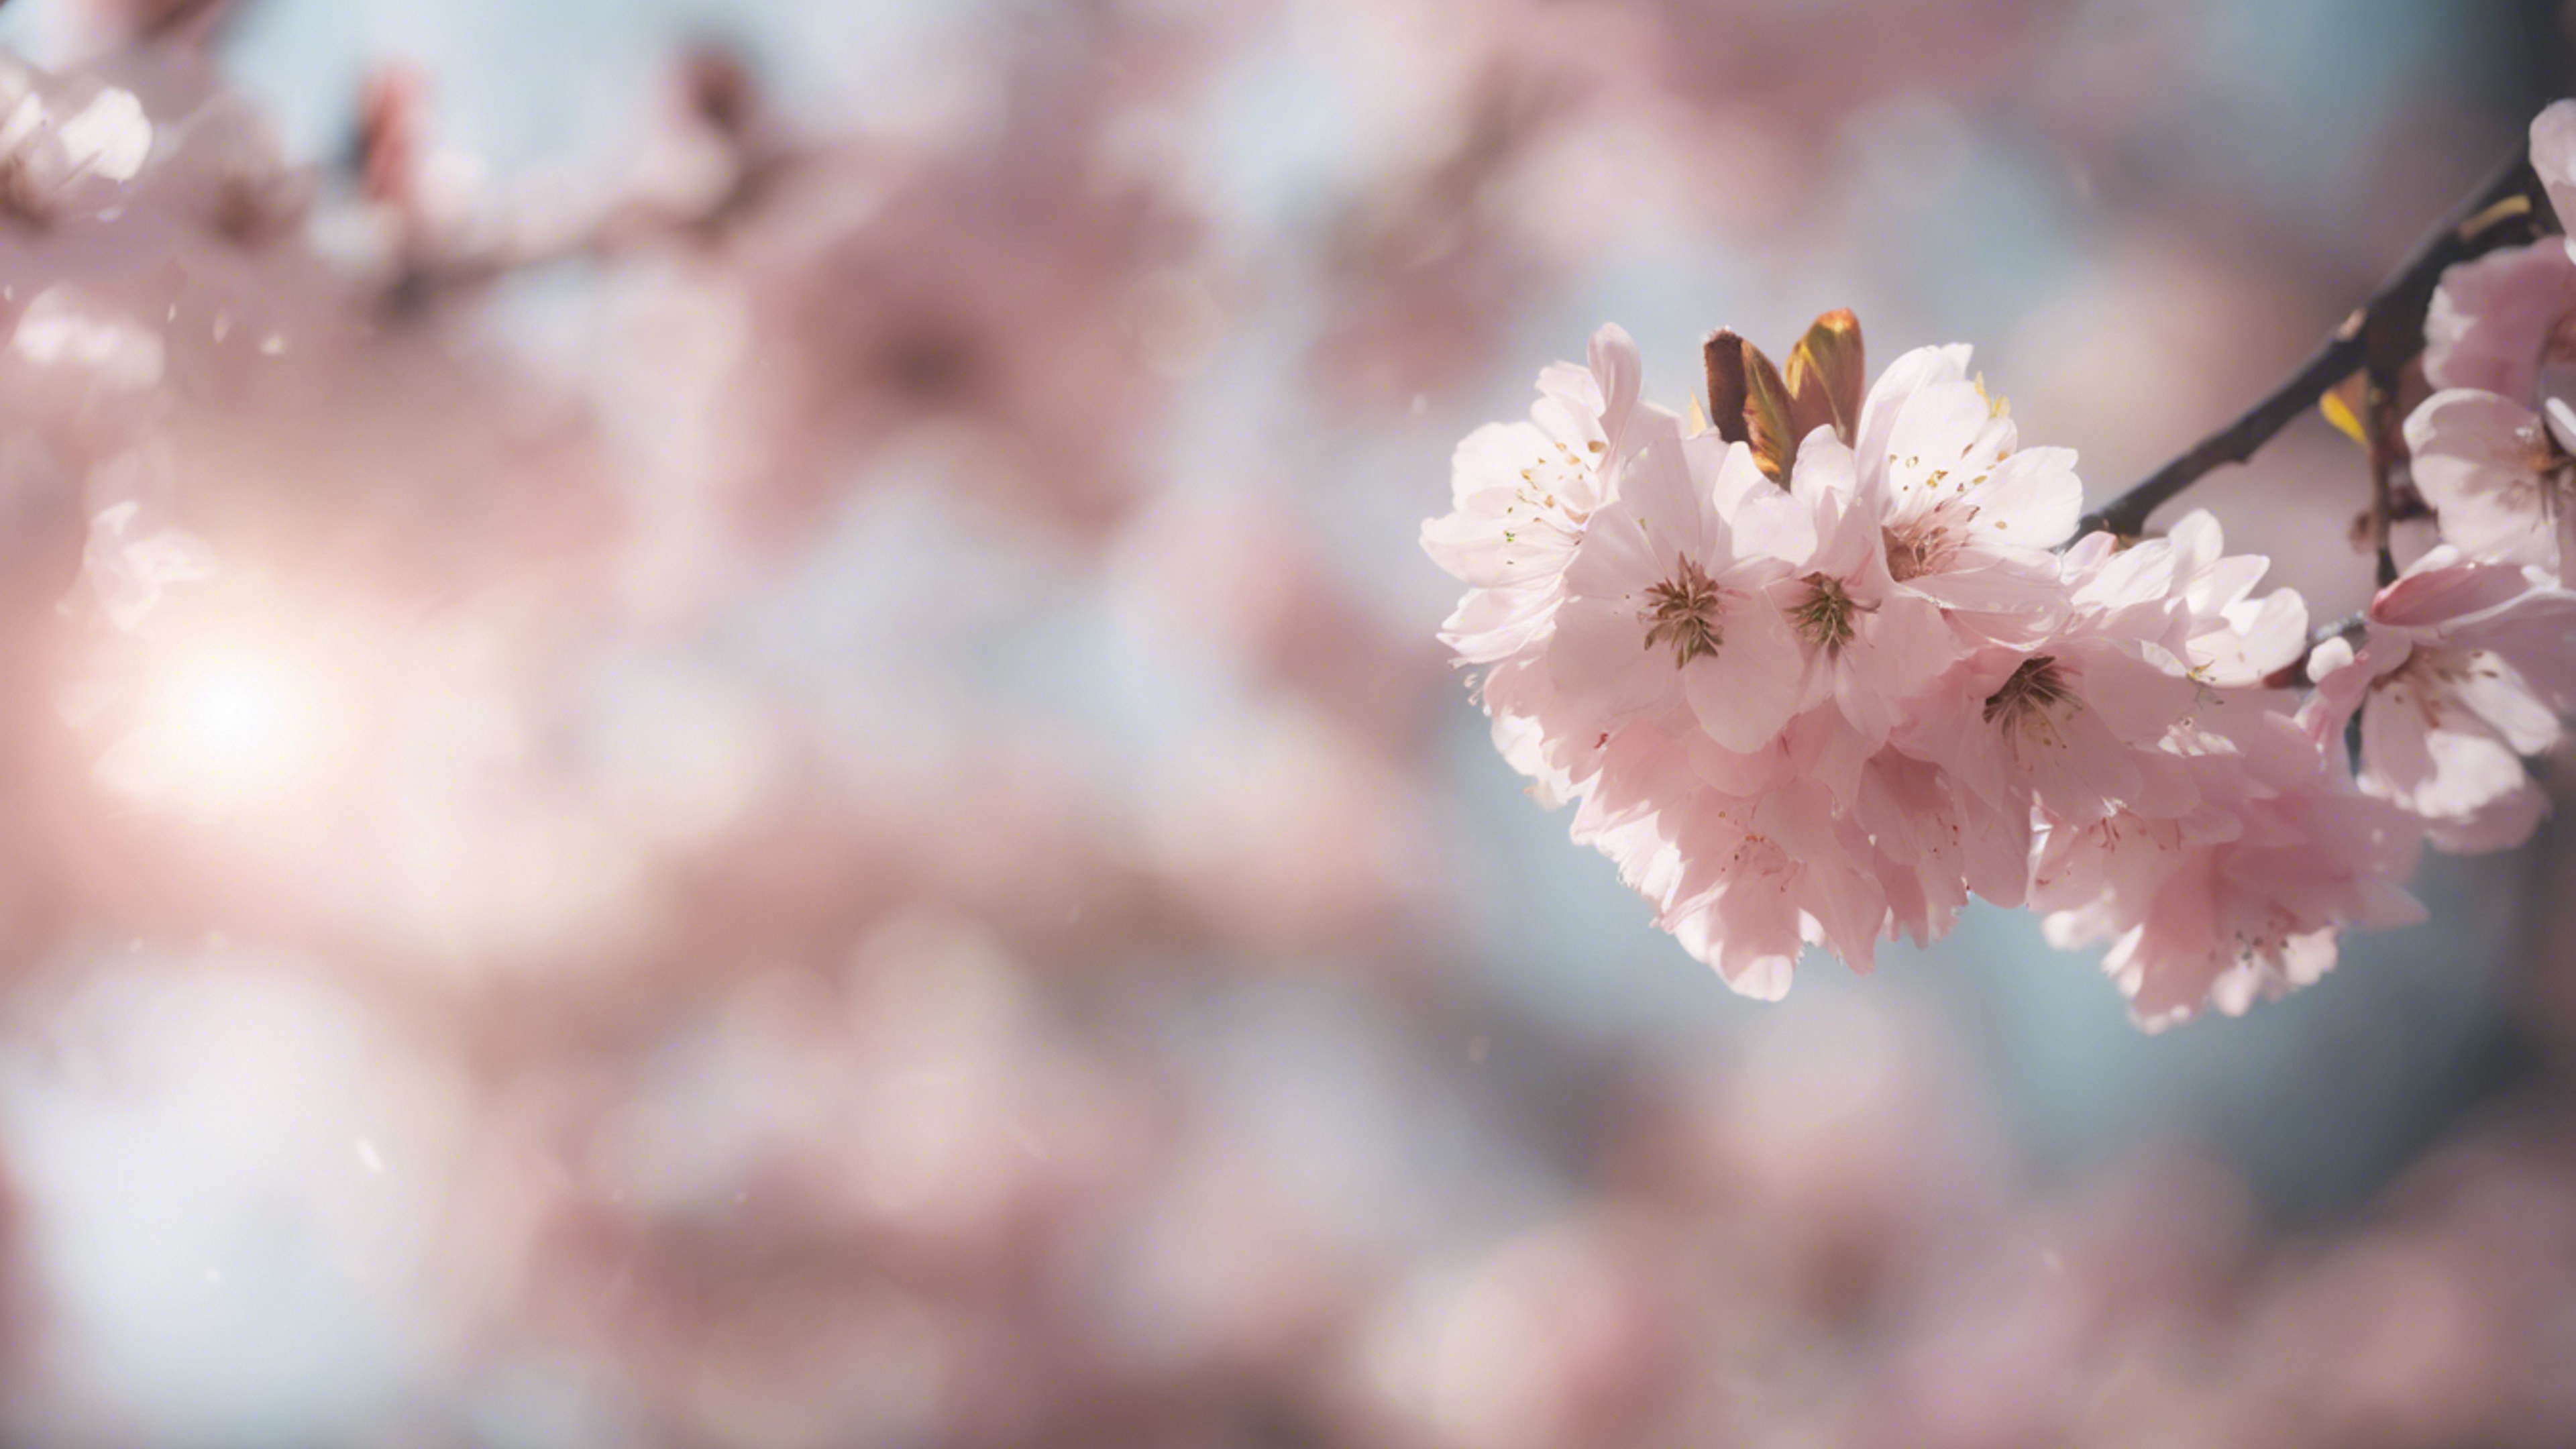 An ethereal dreamscape featuring cherry blossoms wafting in the soft spring breeze.壁紙[9de2e4f1deeb467ebab6]